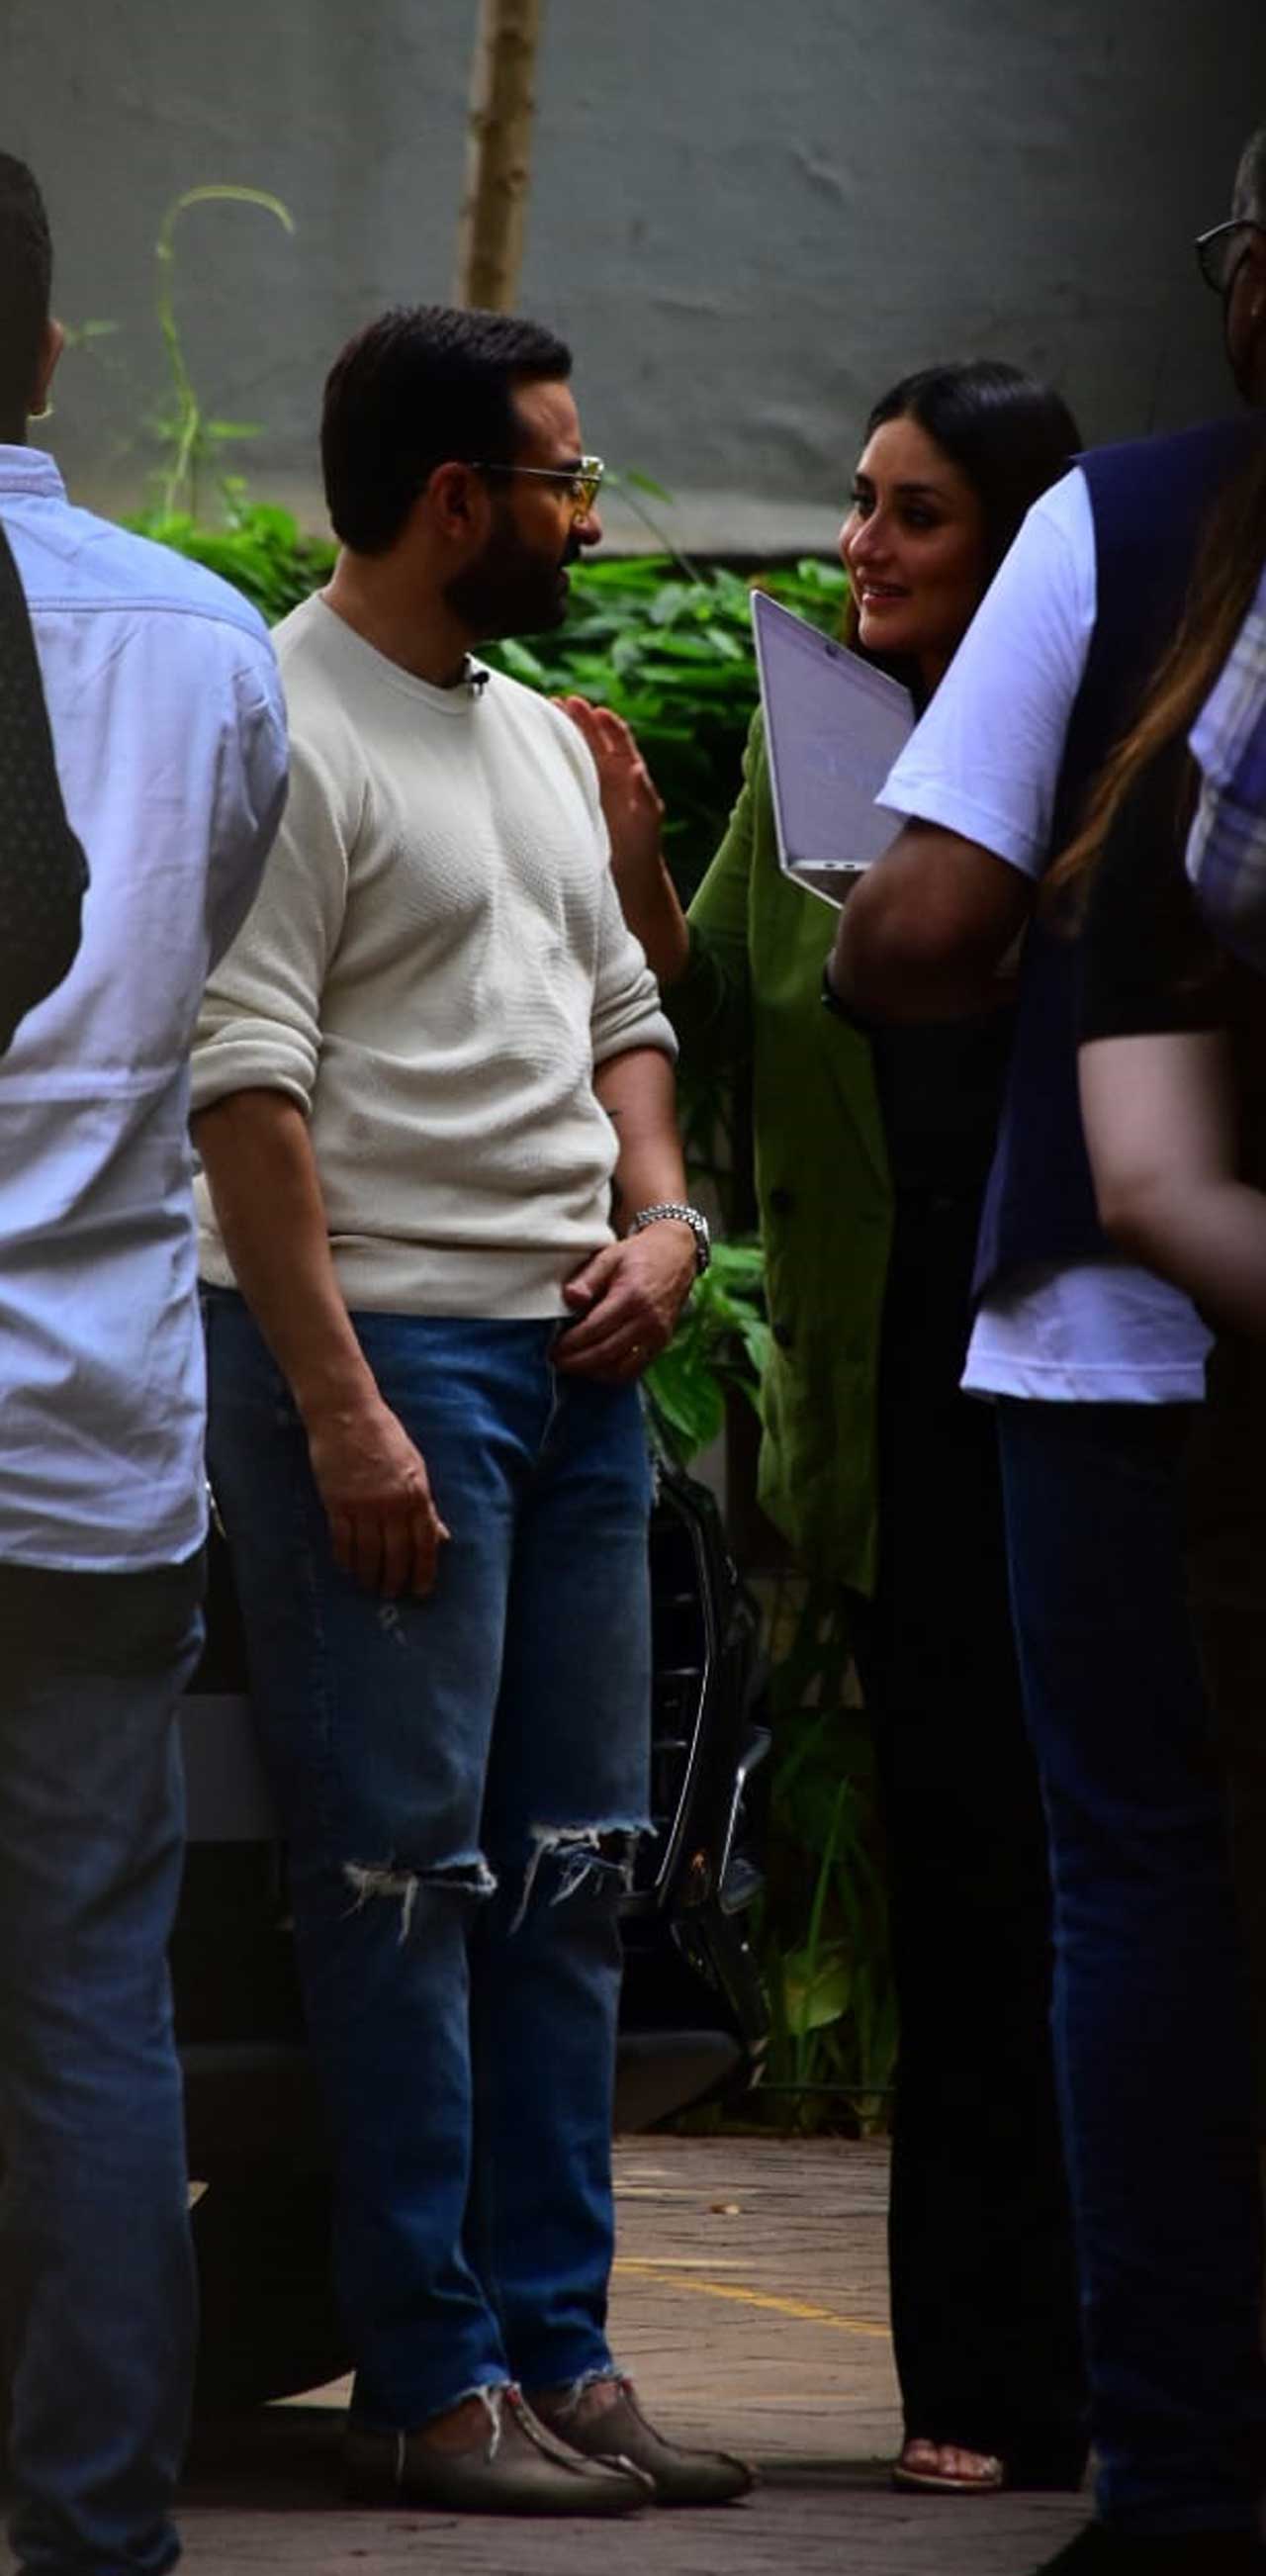 Kareena Kapoor Khan and Saif Ali Khan recently returned from their vacation in Pataudi along with Taimur Ali Khan and Jeh Ali Khan. The star family was spotted at Mumbai airport on Friday as they returned to the city.